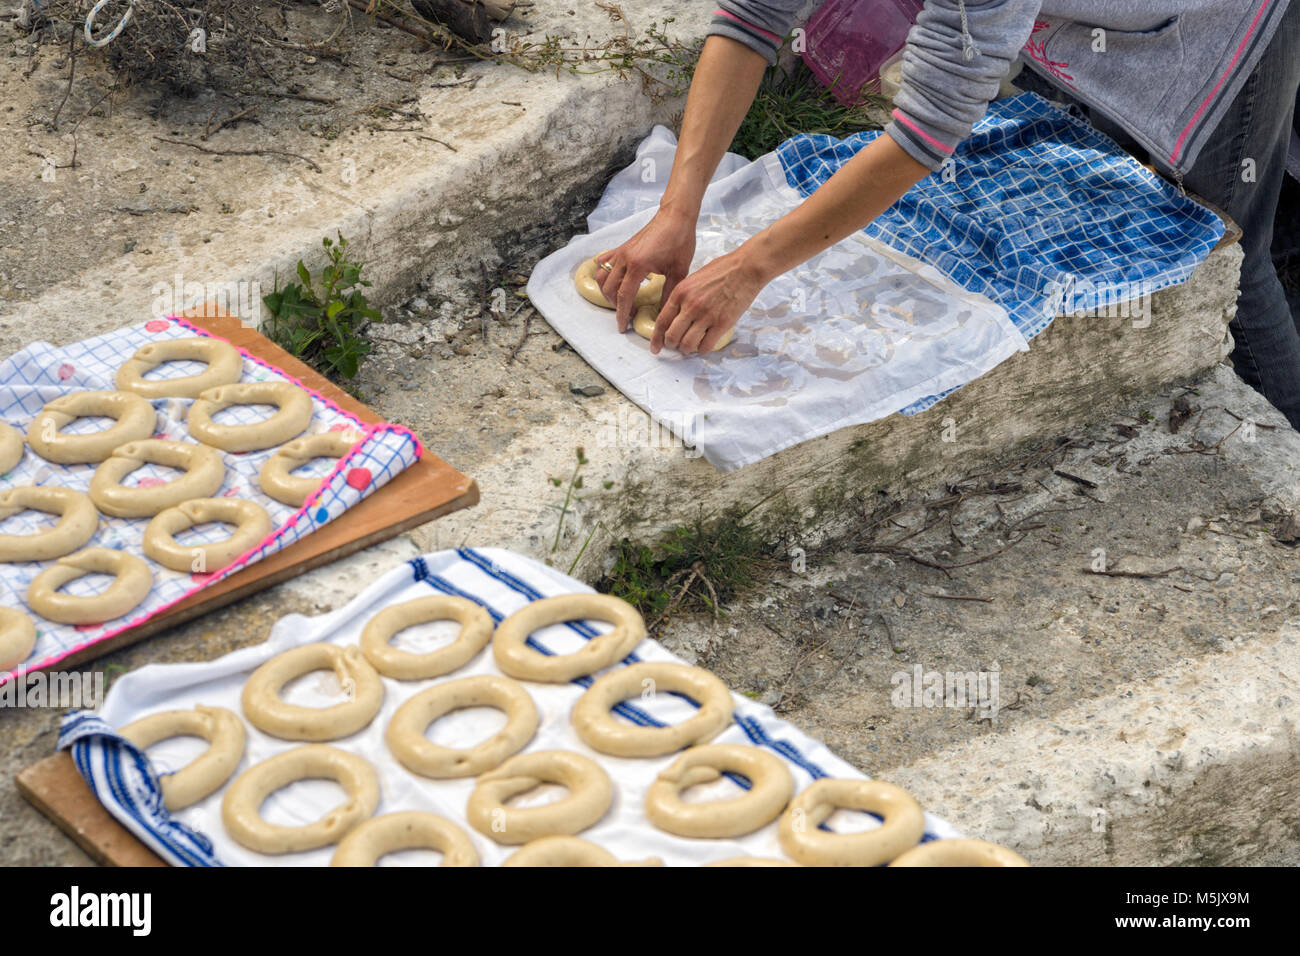 Greece, Aegean Islands, Olympos, Karpathos island, The village of Olympos seem timeless. to make bread is one of the main activities of the women Stock Photo